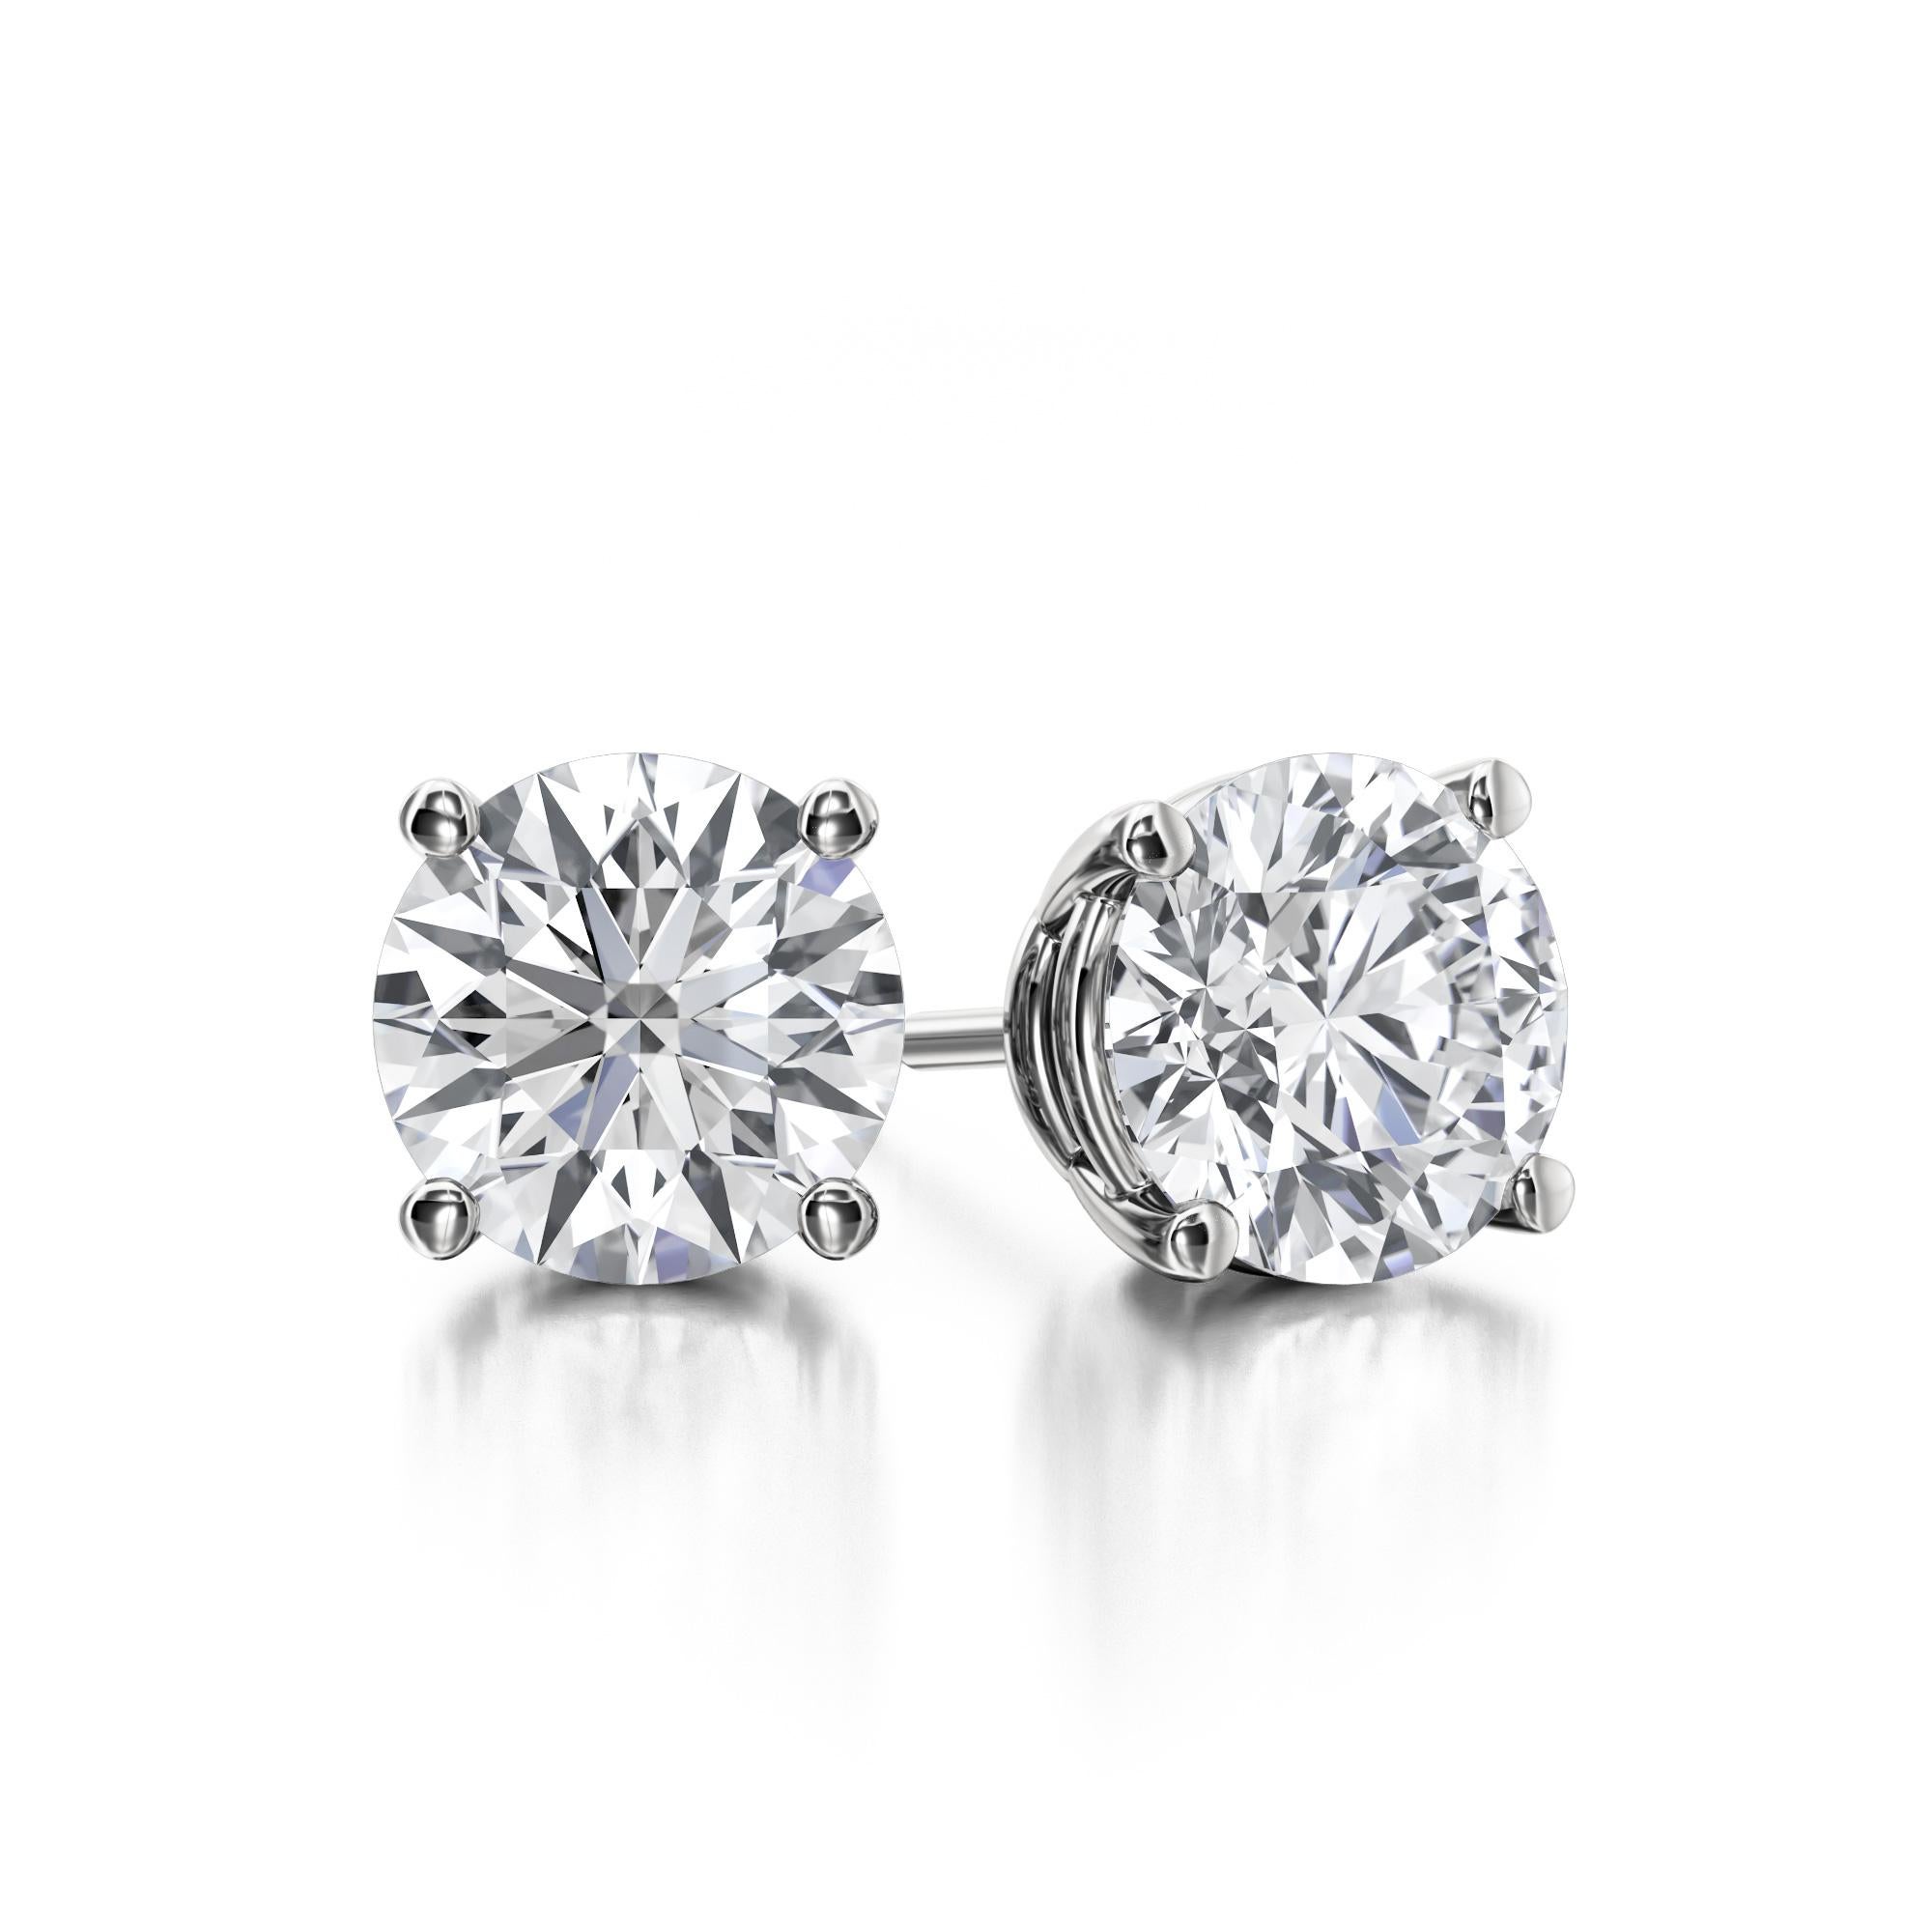 Classic Four Prong Diamond Stud Earrings, featuring:
✧ 2 natural diamonds G-H color VS1-VS2 weighing 1.00 carats 
✧ Measurements: 5.20mm*5.20mm
✧ Available in 18K White Gold
✧ Push back friction closure
✧ Free appraisal included with your purchase
✧